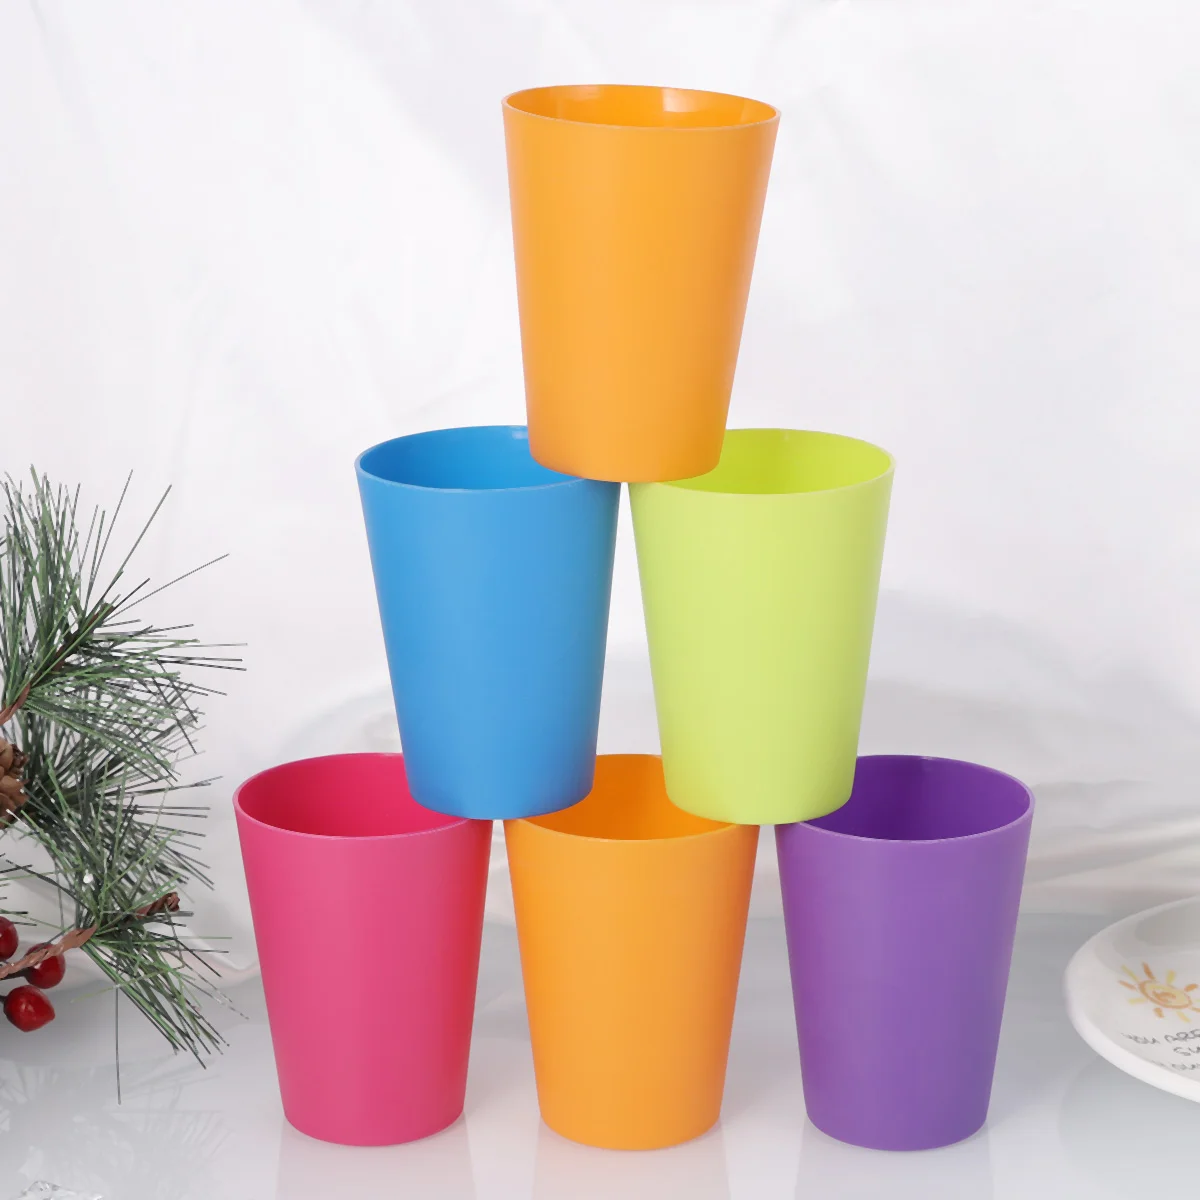 

15pcs Colorful Glasses Disposable Home Beverage Drinking Cup Reusable Holiday Party Tableware and Party Supplies 101-200ml